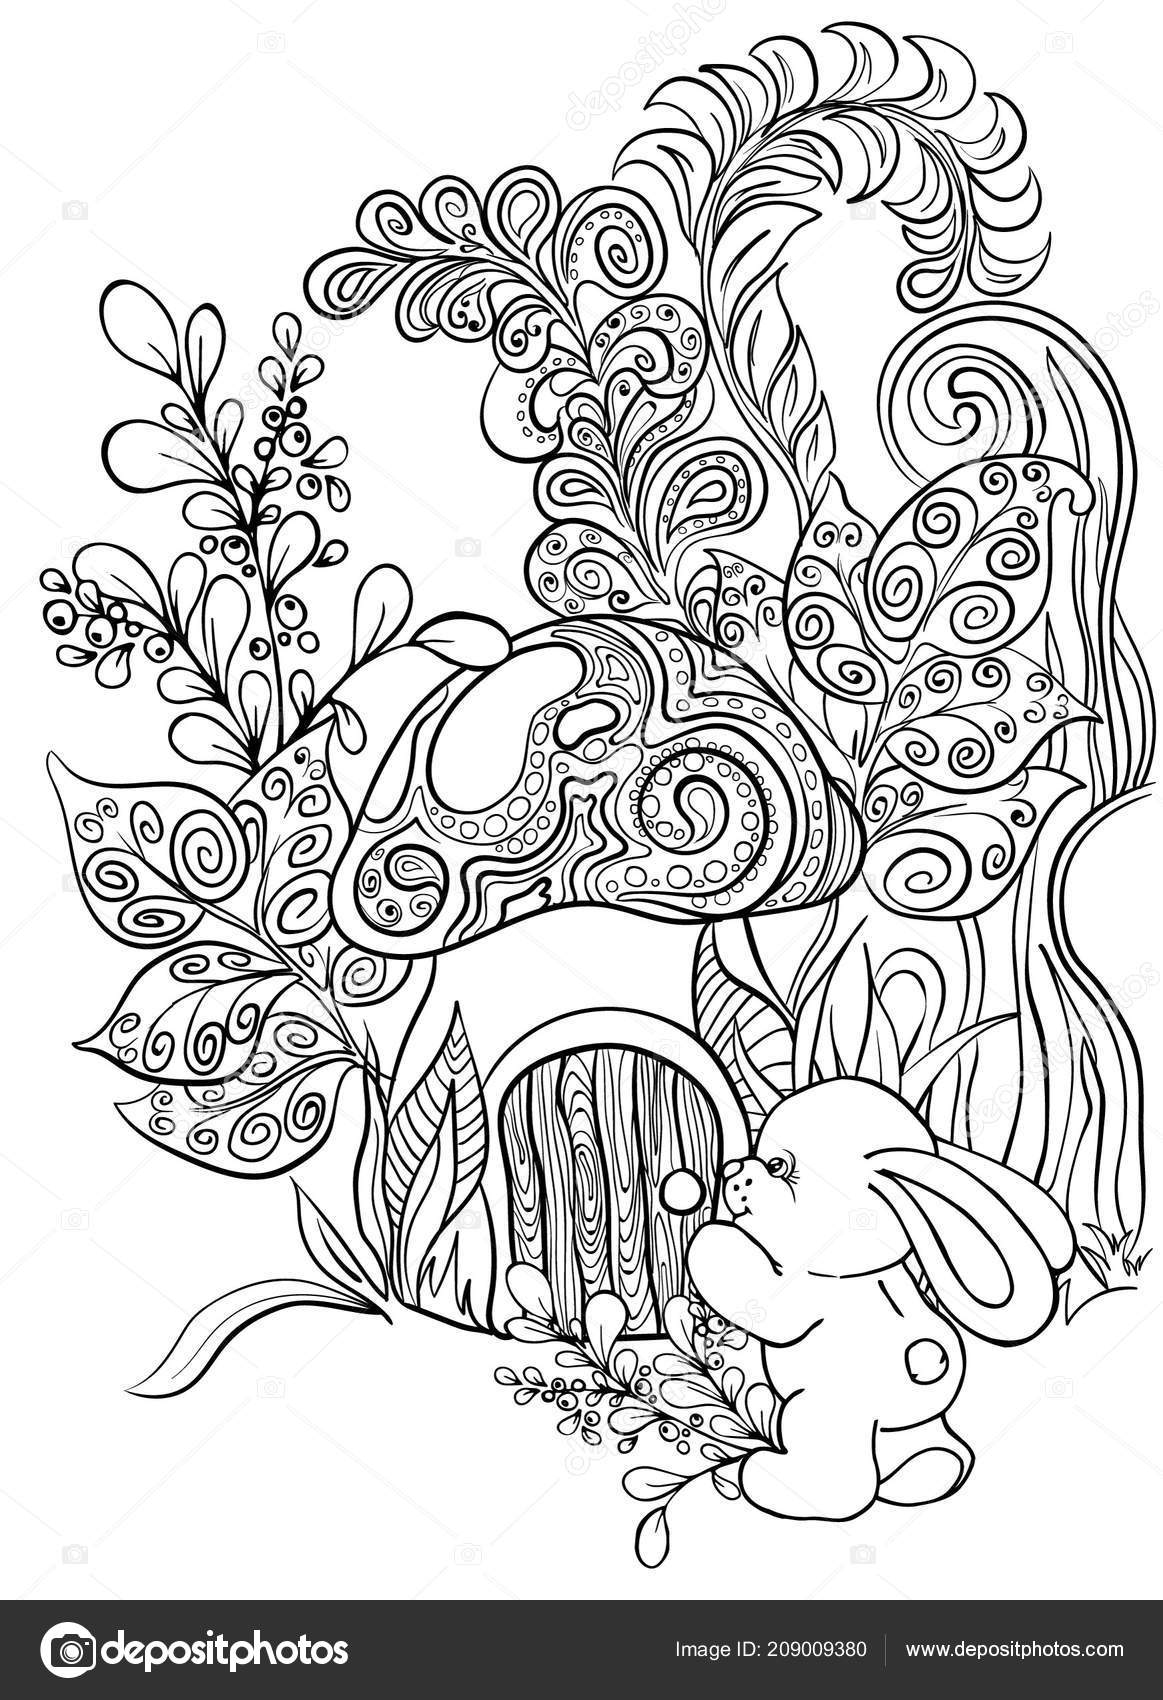 Adult Coloring Books: Art Therapy Adult Coloring Book Gift Basket